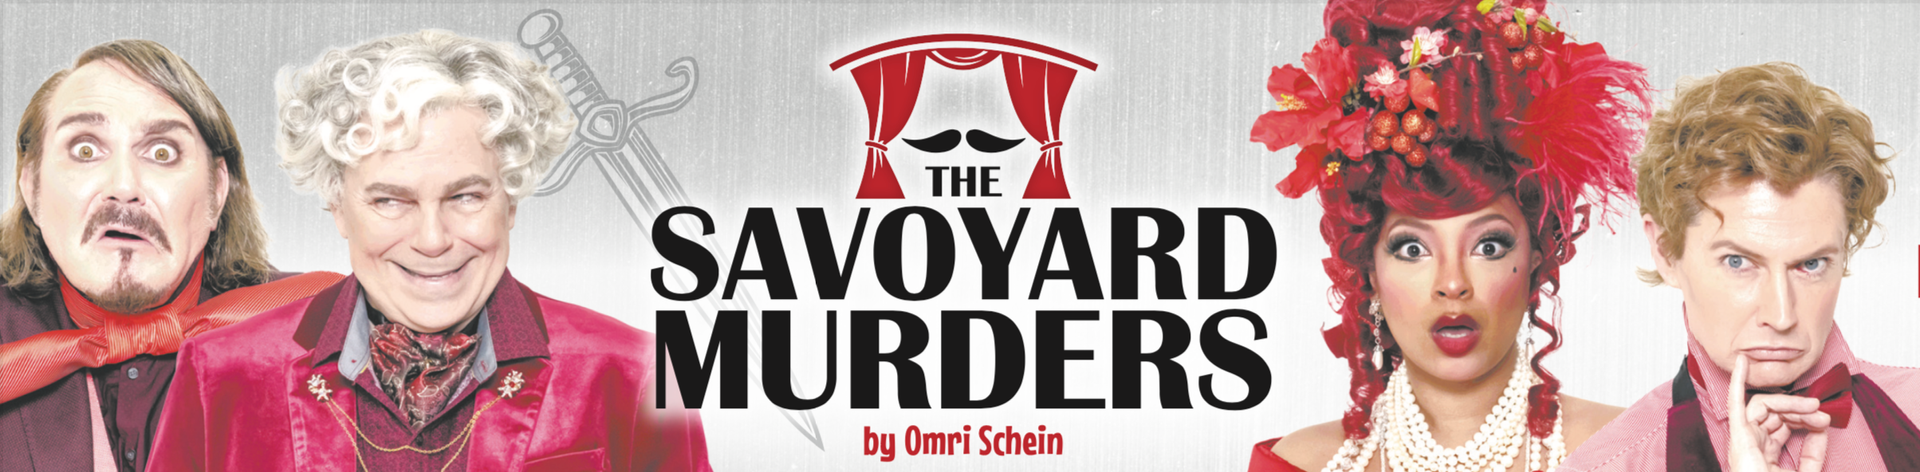 Title treatment for The Savoyard Murders with 4 actors in period costumes